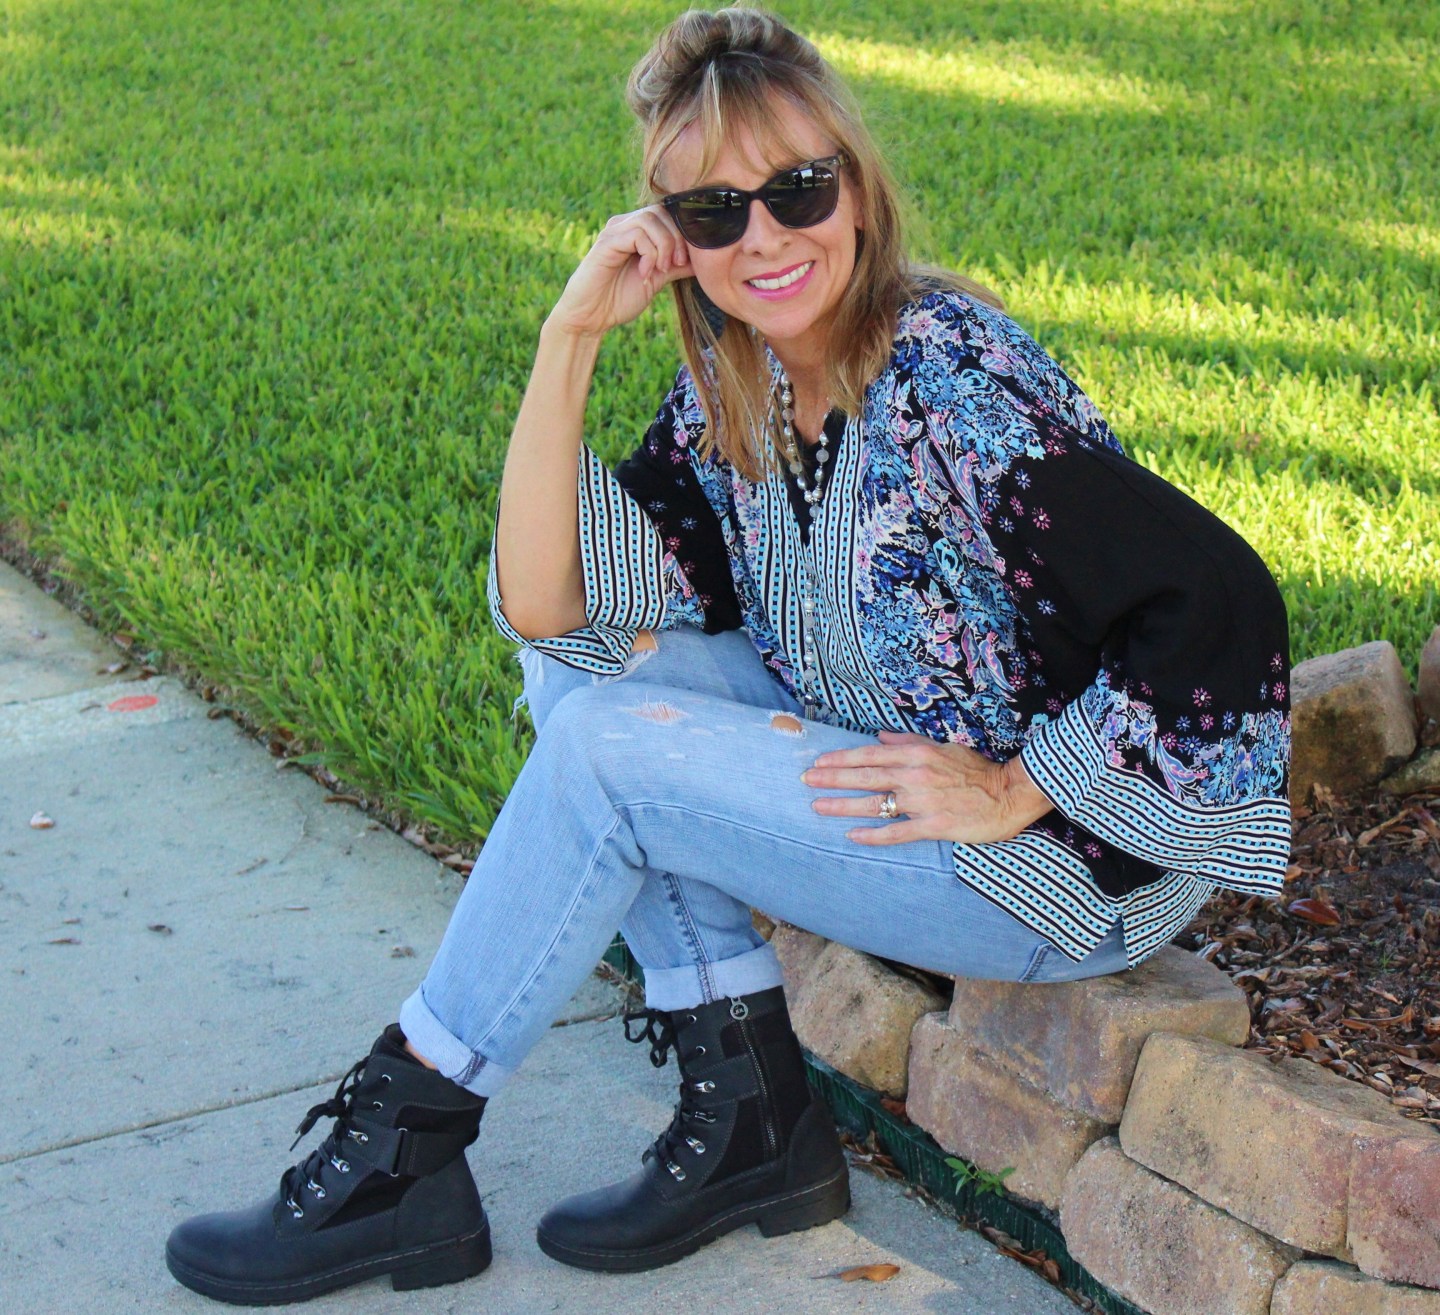 Cool Girls Love Wearing These Combat-Boot Outfits